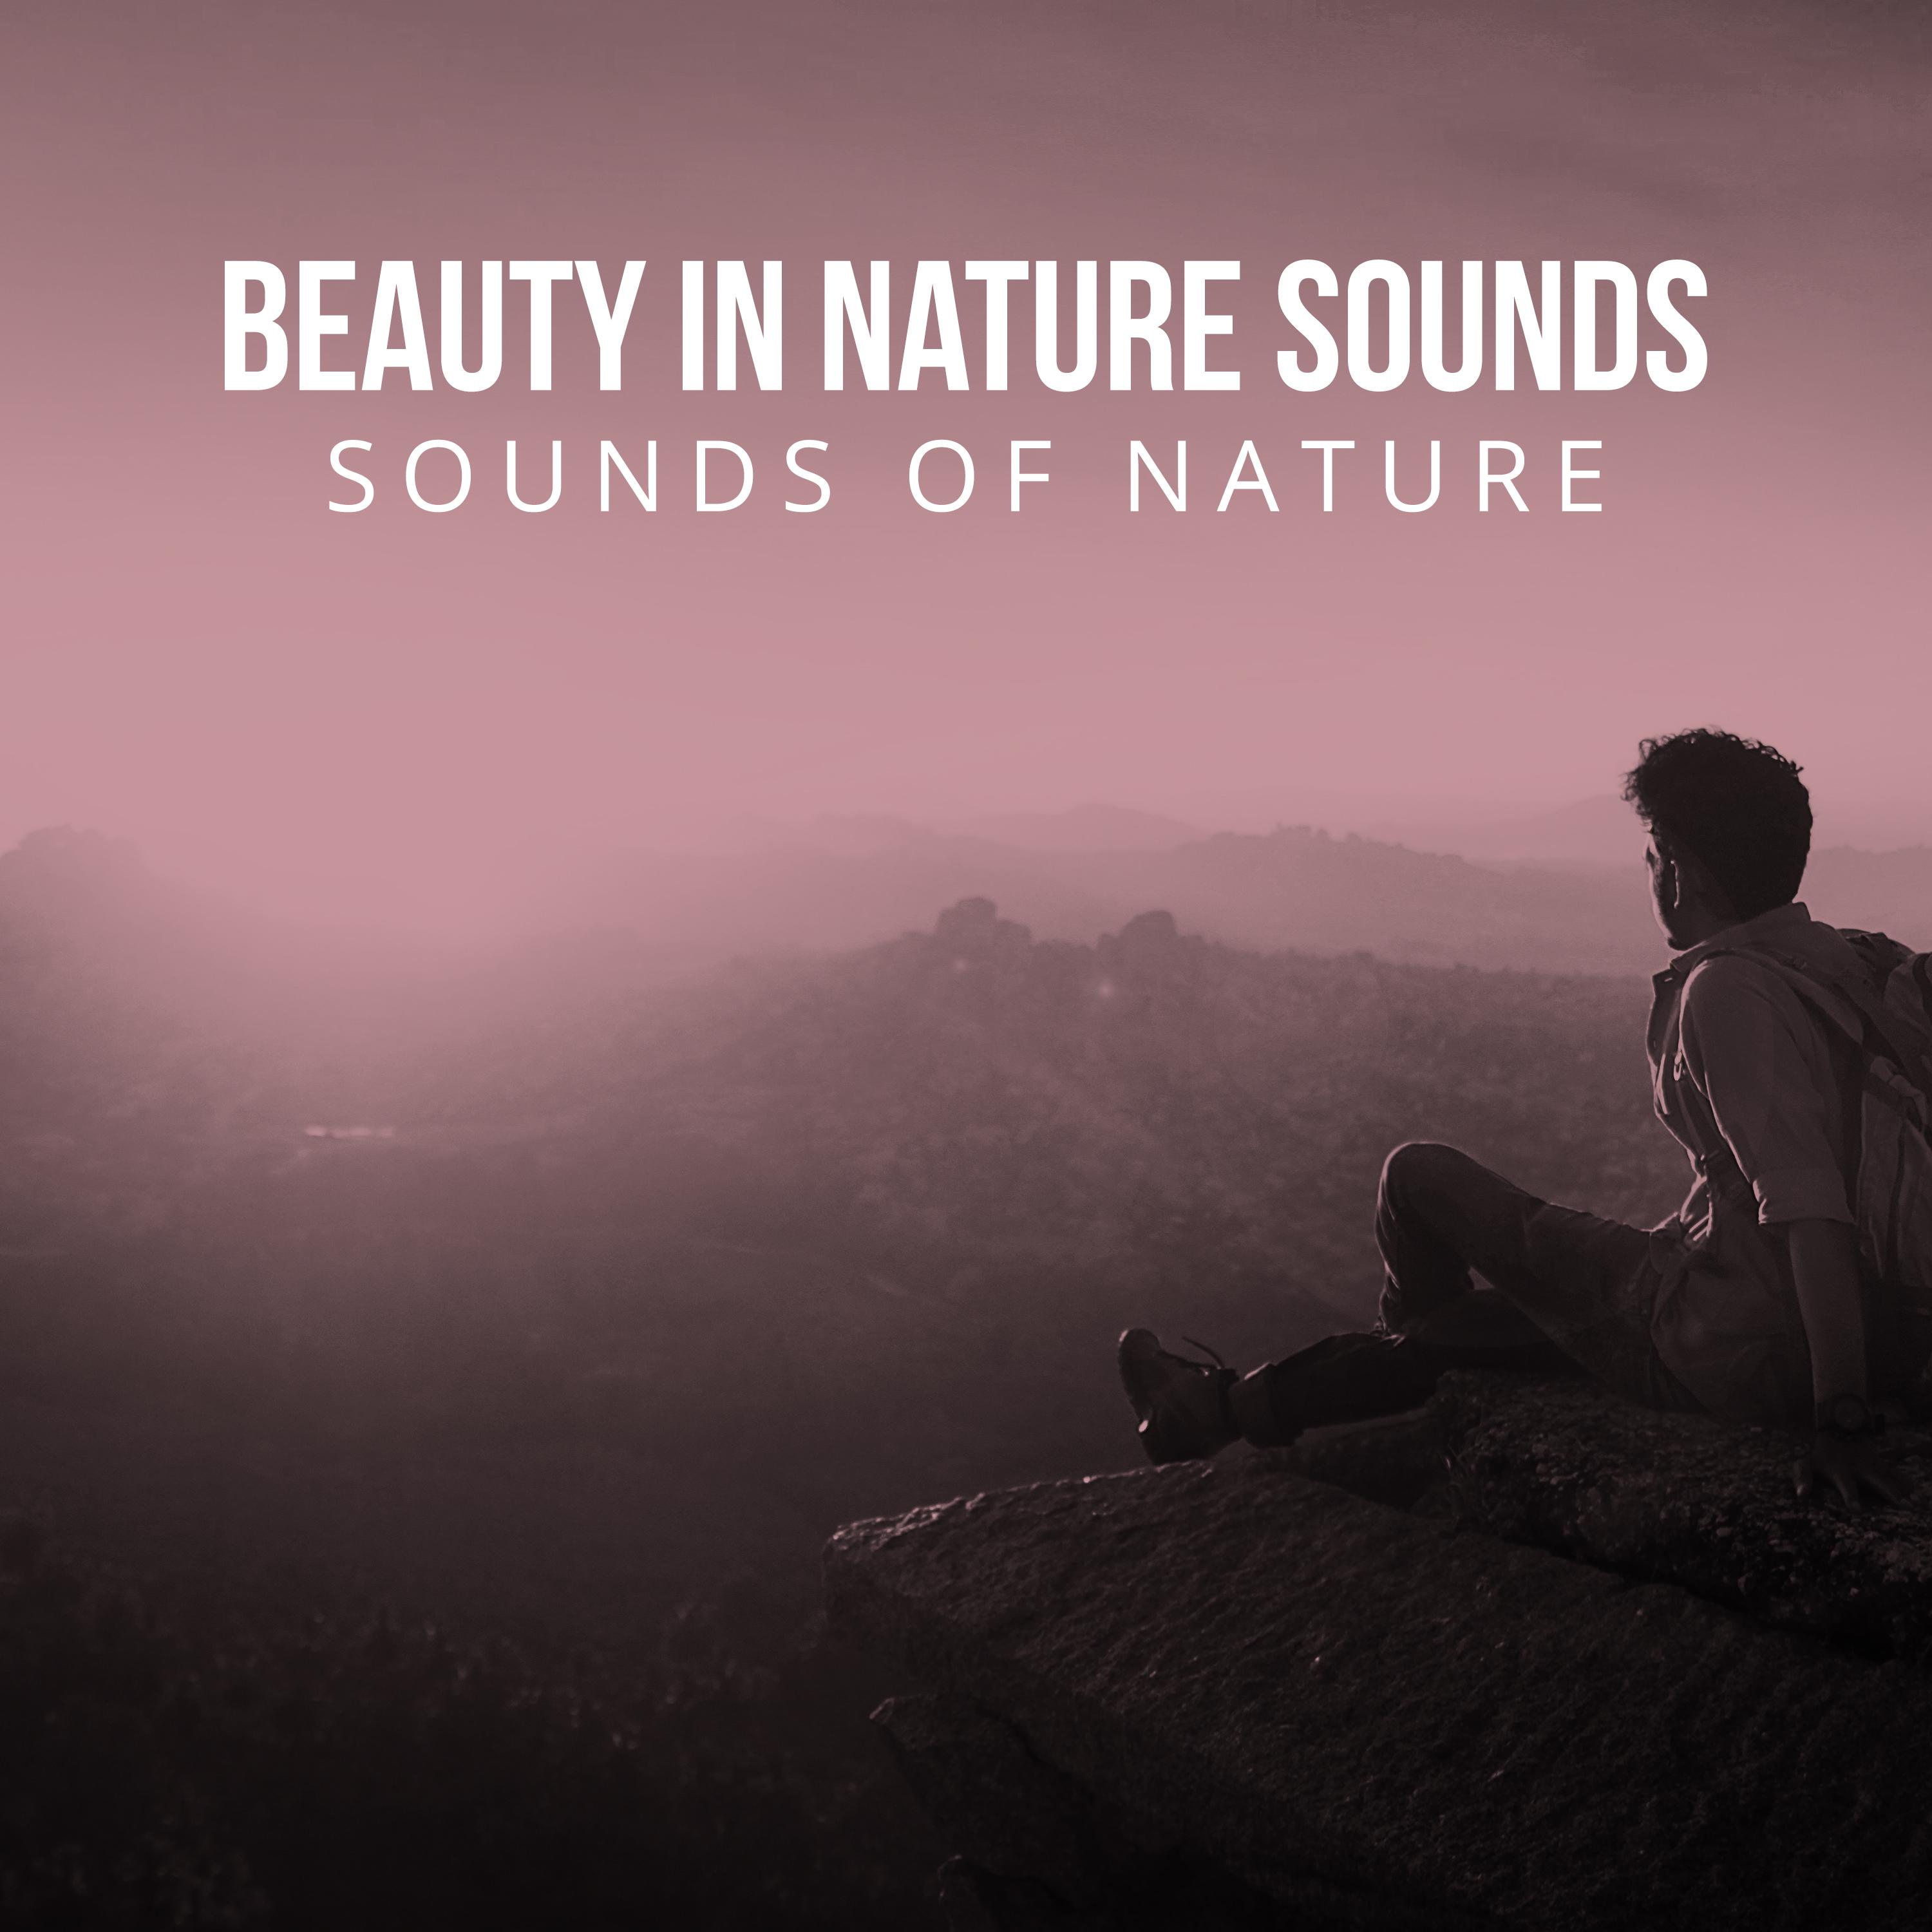 Beauty in Nature Sounds